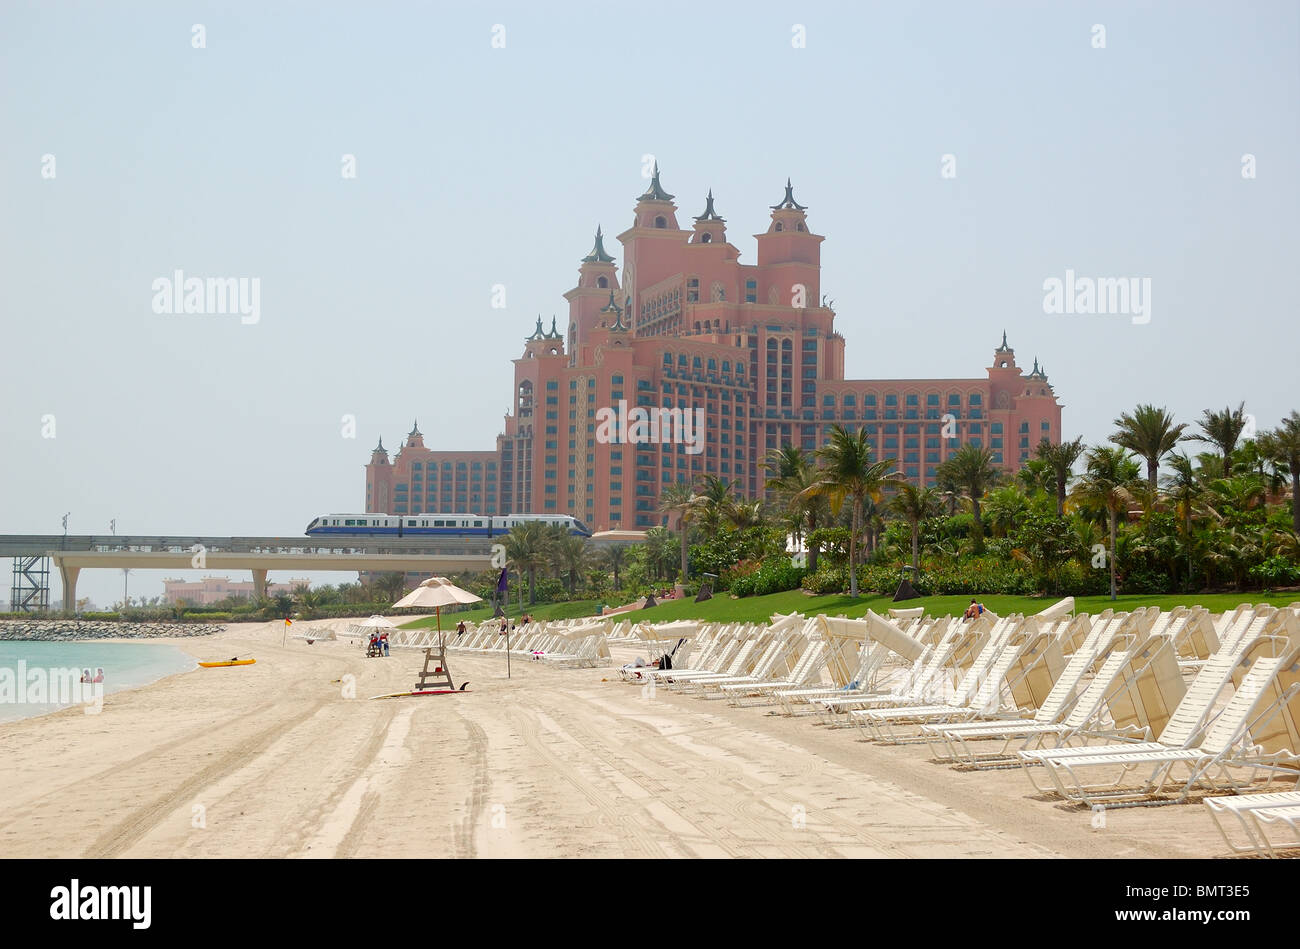 The beach of Atlantis the Palm hotel with a view on hotel and monorail train is  located on man-made island Palm Jumeirah Stock Photo